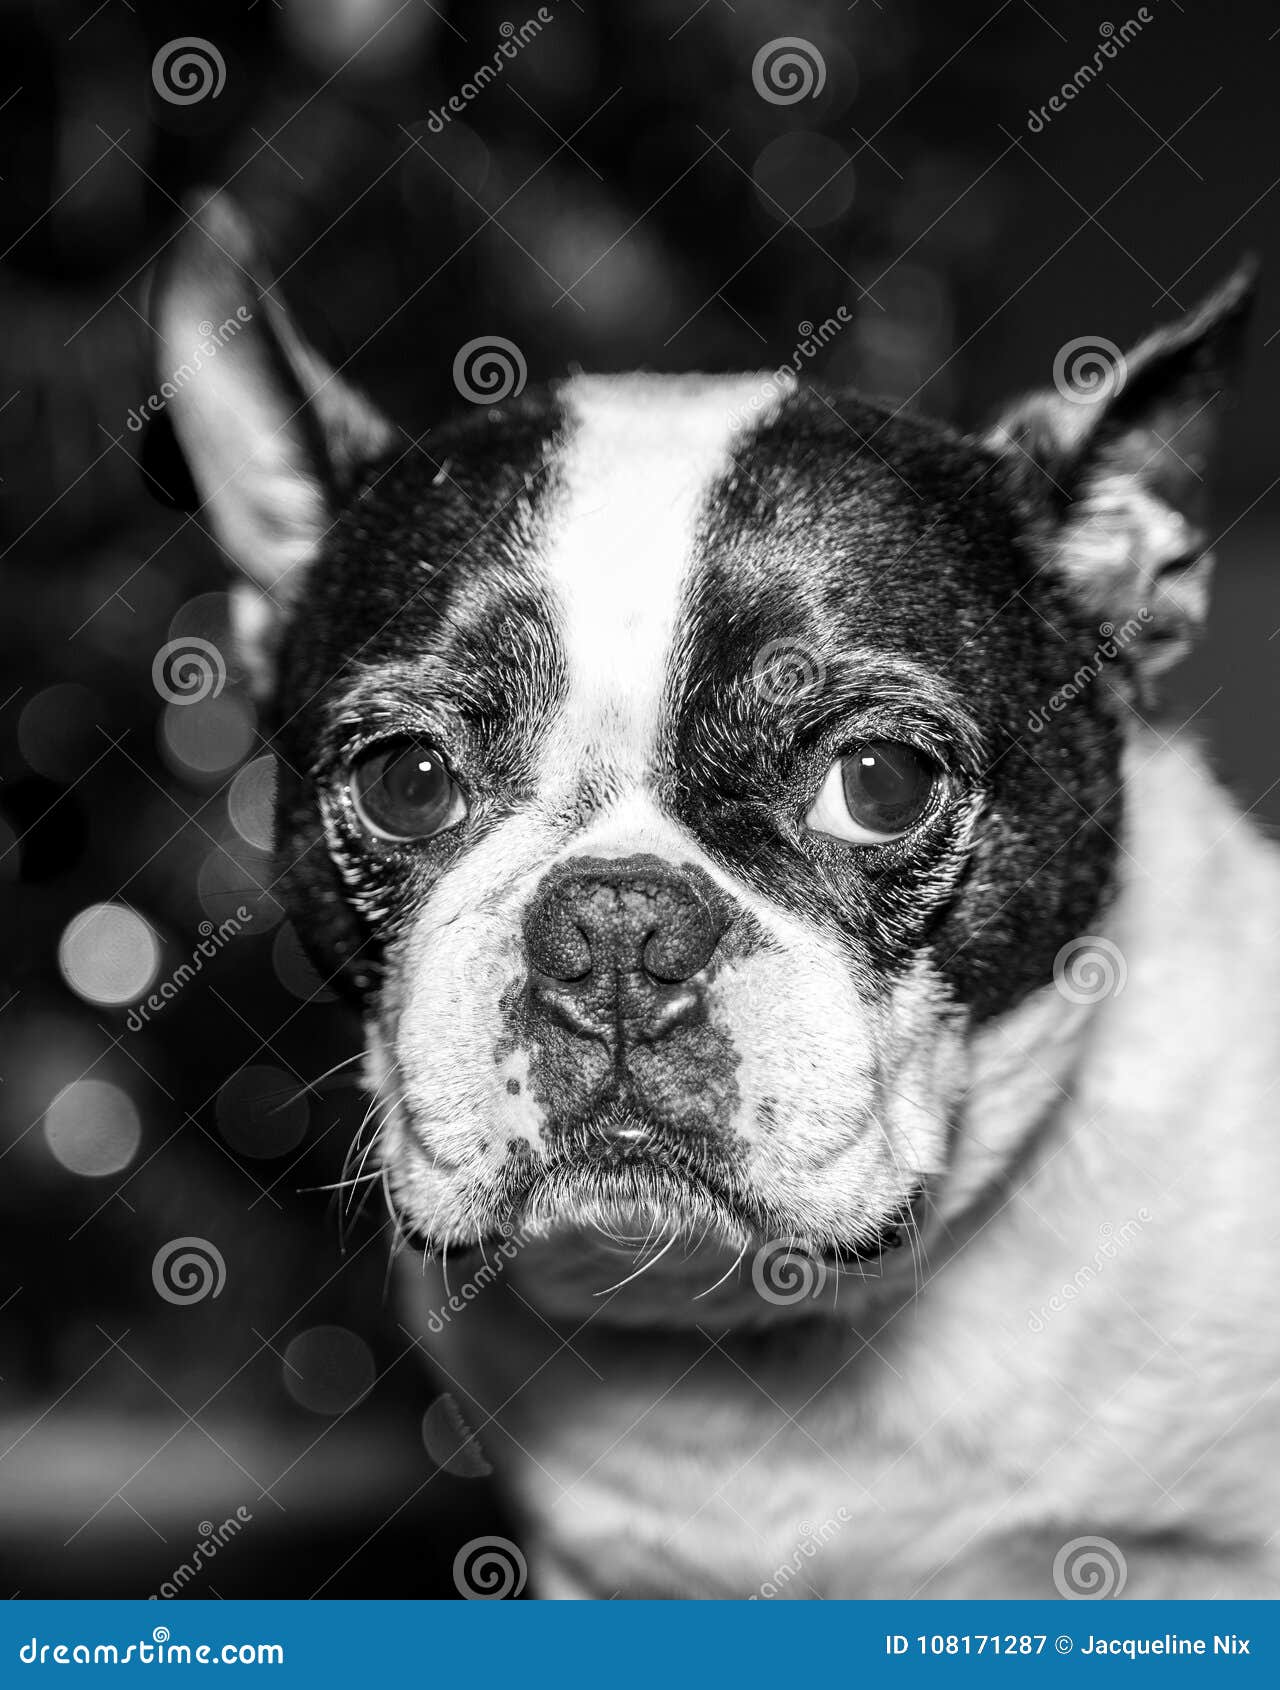 Boston Terrier Portrait In Black And White Stock Image - Image of eyes ...